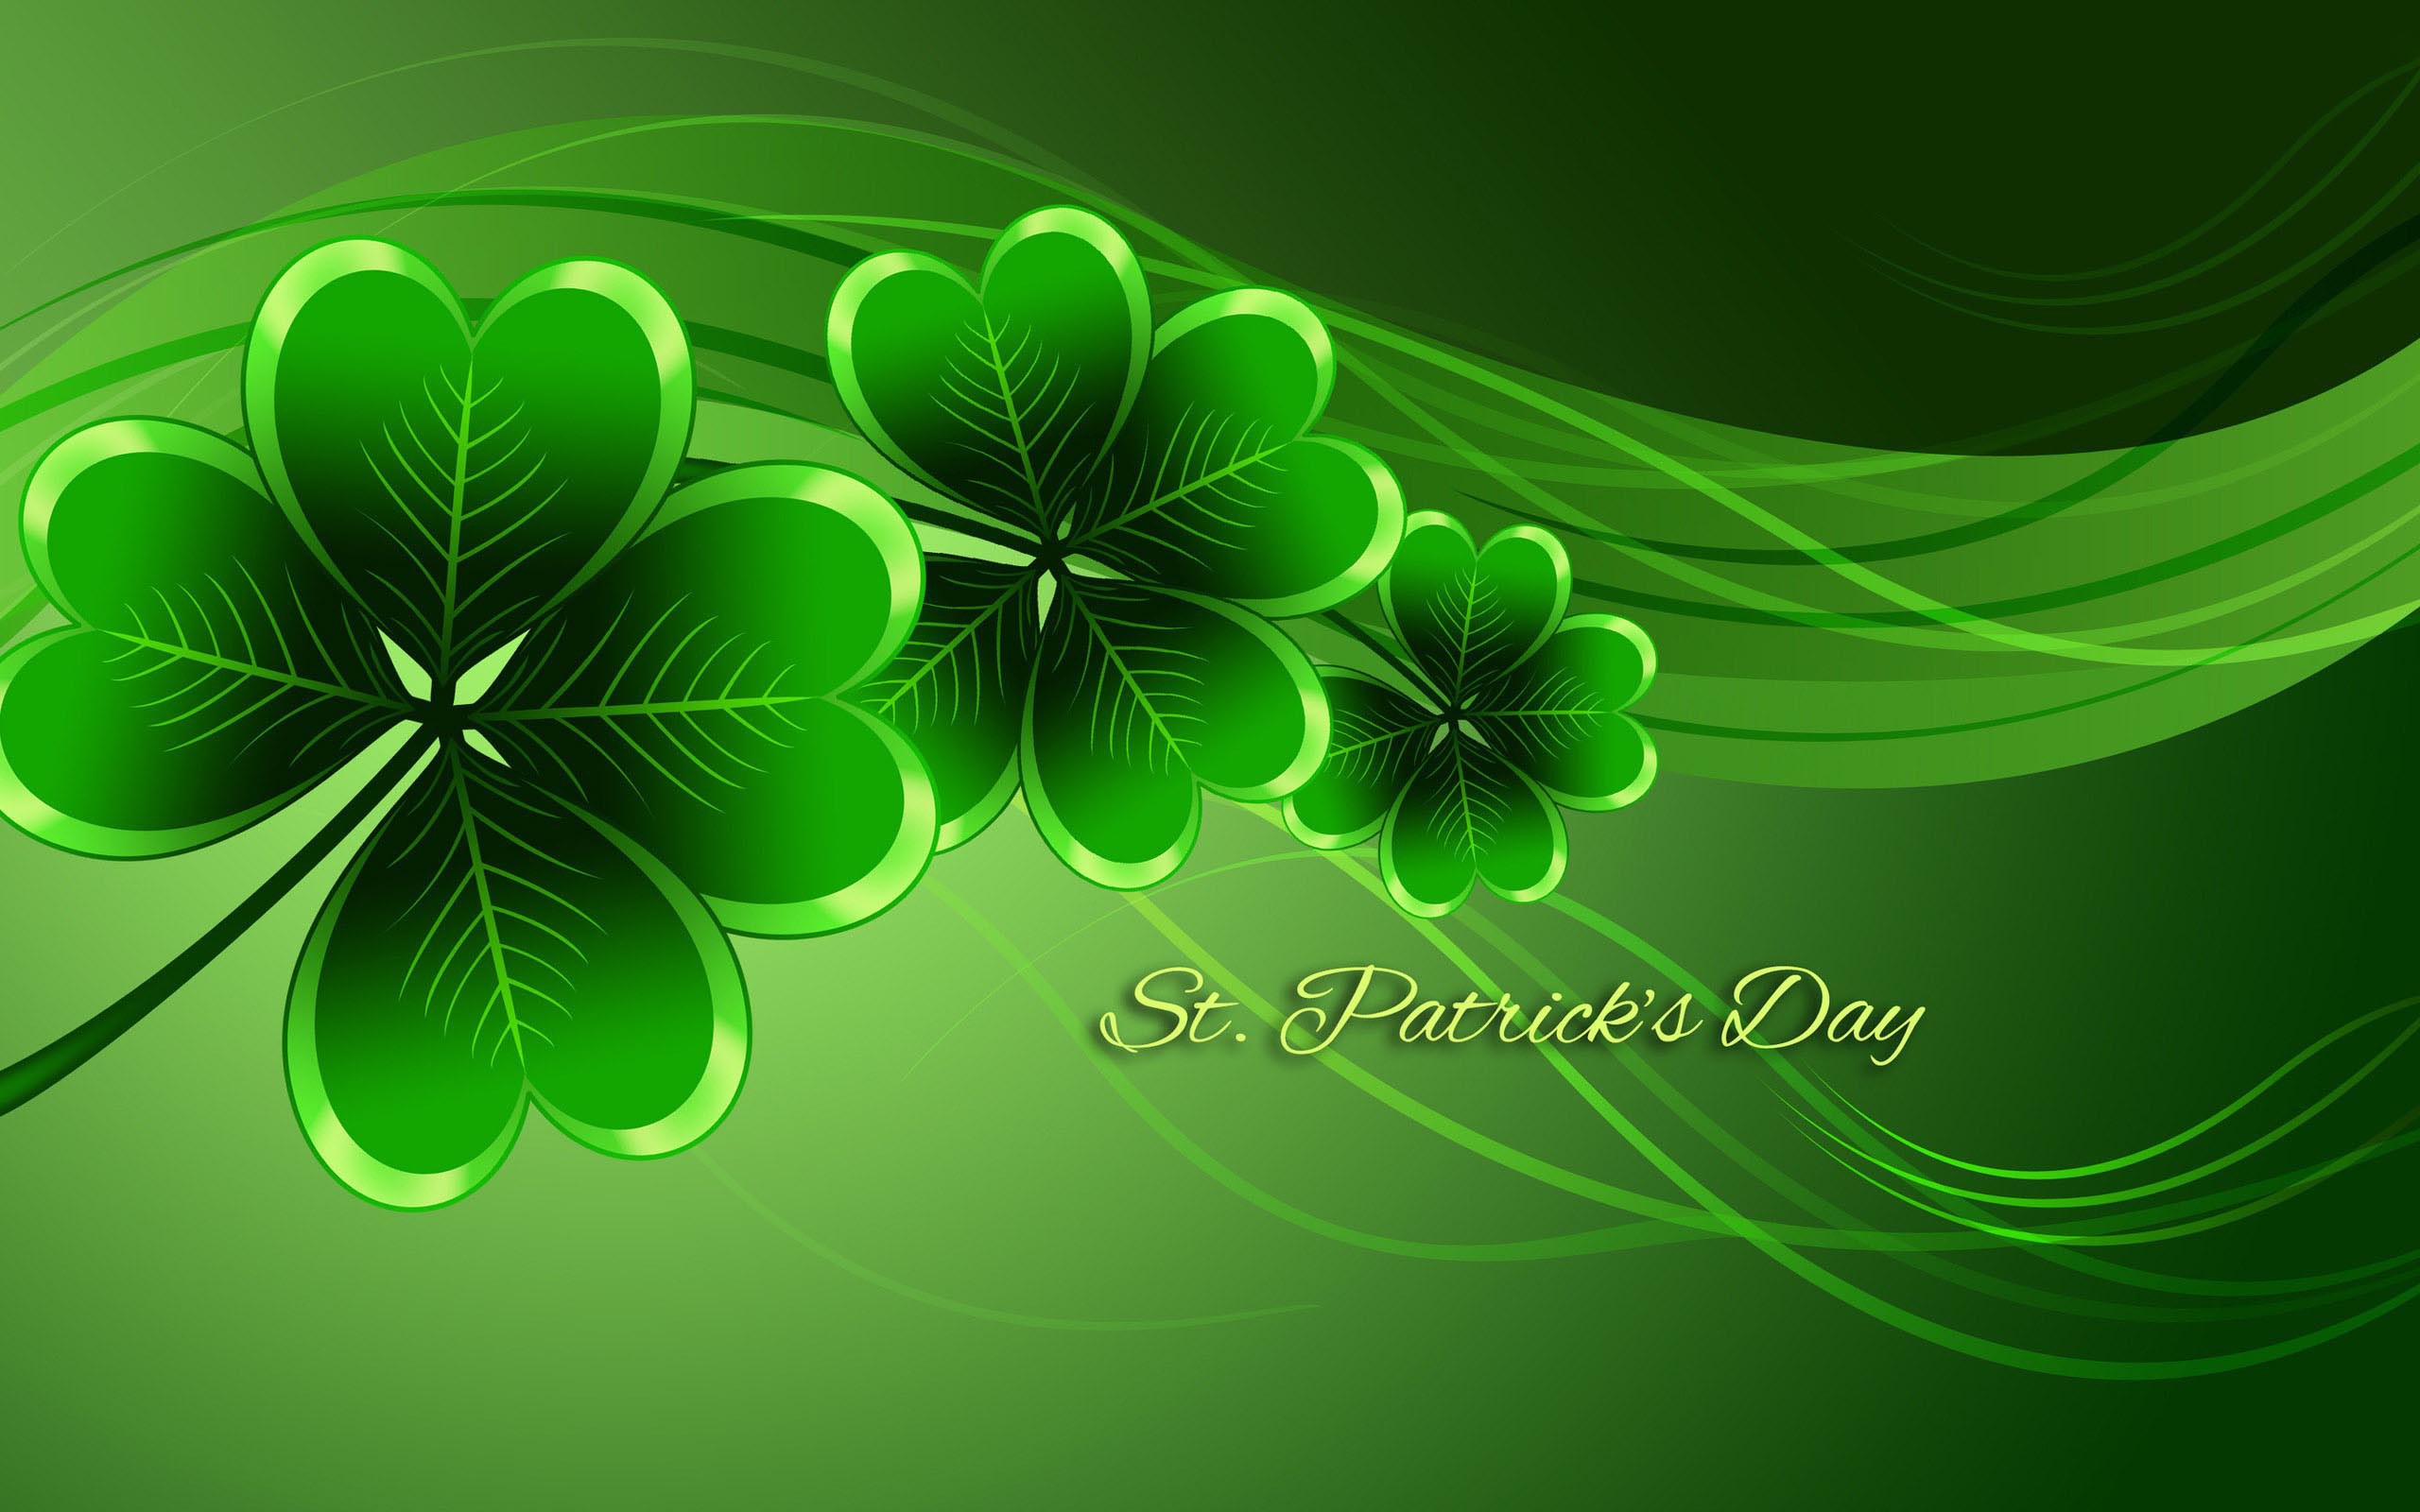 St. Patrick's Day HD Wallpapers.